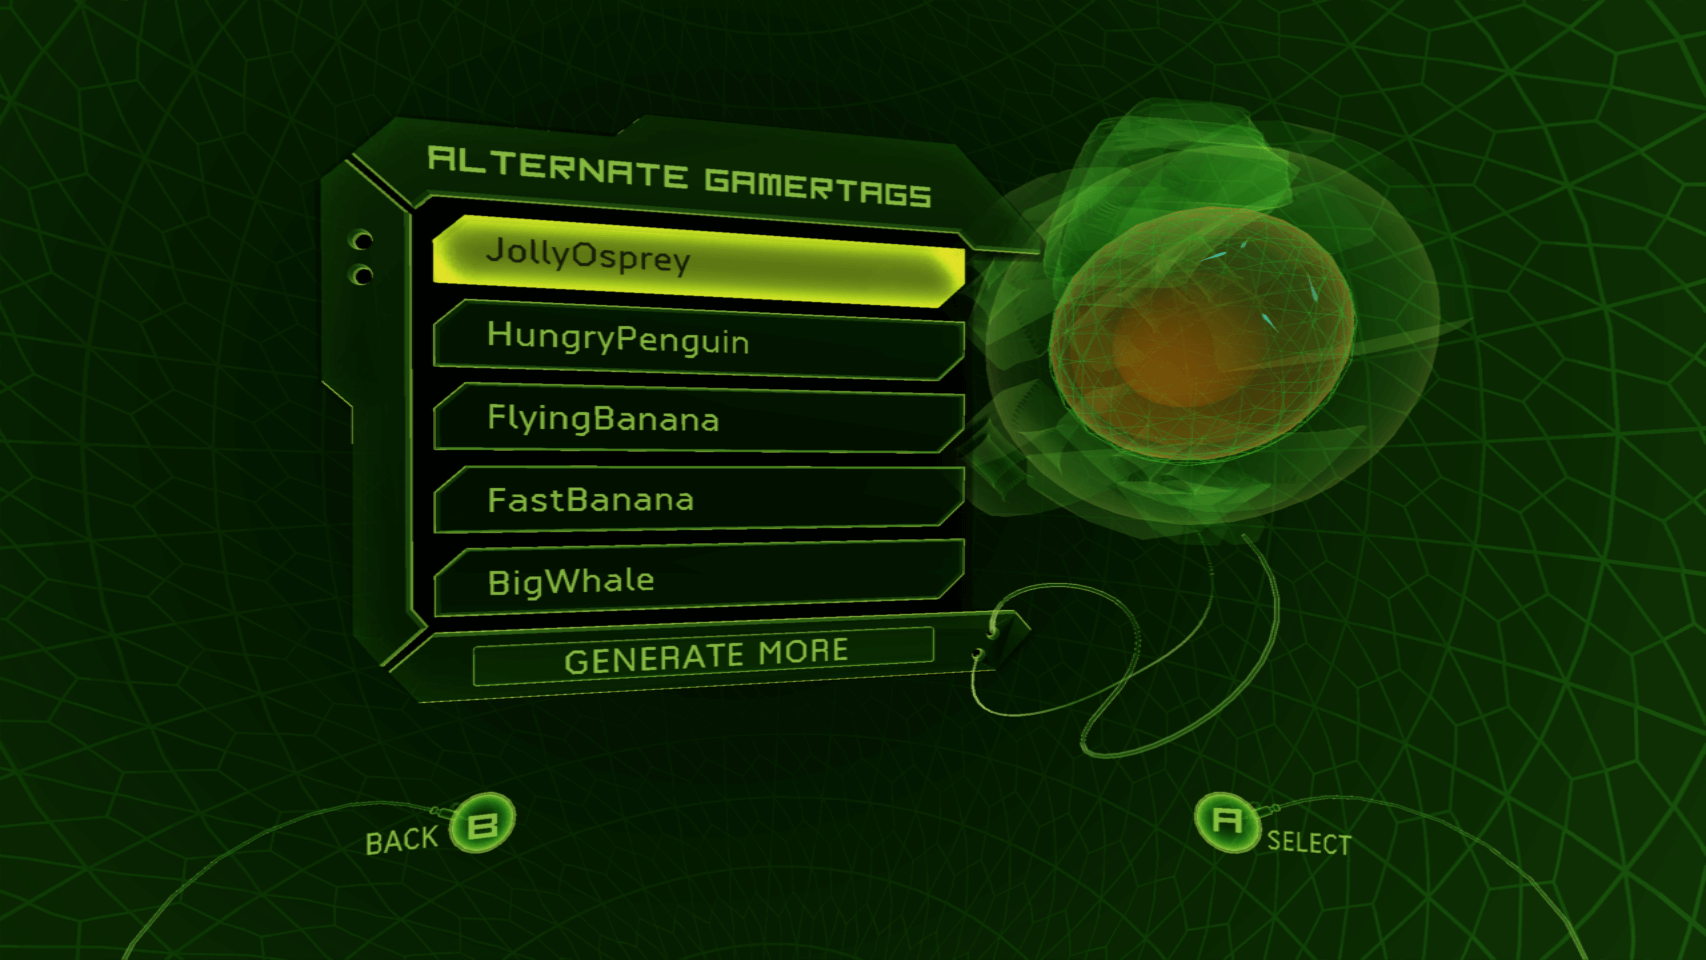 Alternative Gamertags screen, with 5 randomly generated options provided to the user such as "JollyOsprey"